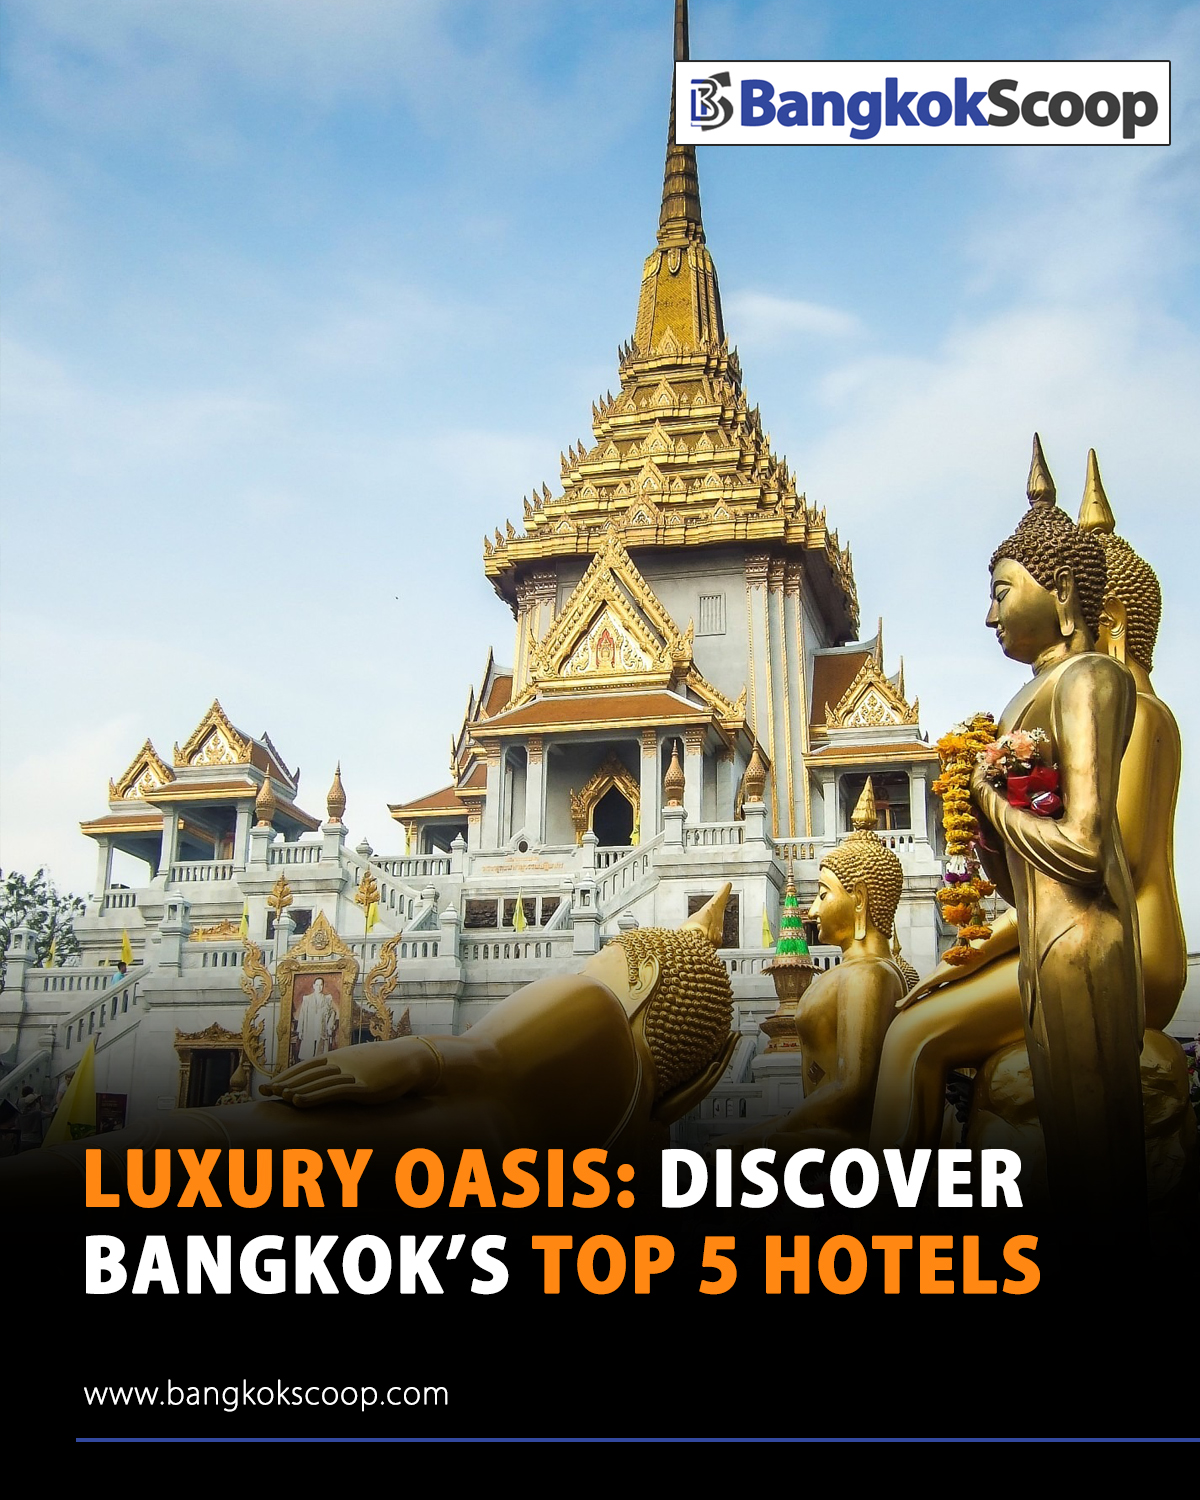 Luxury Oasis: Discover Bangkok’s Top 5 Hotels